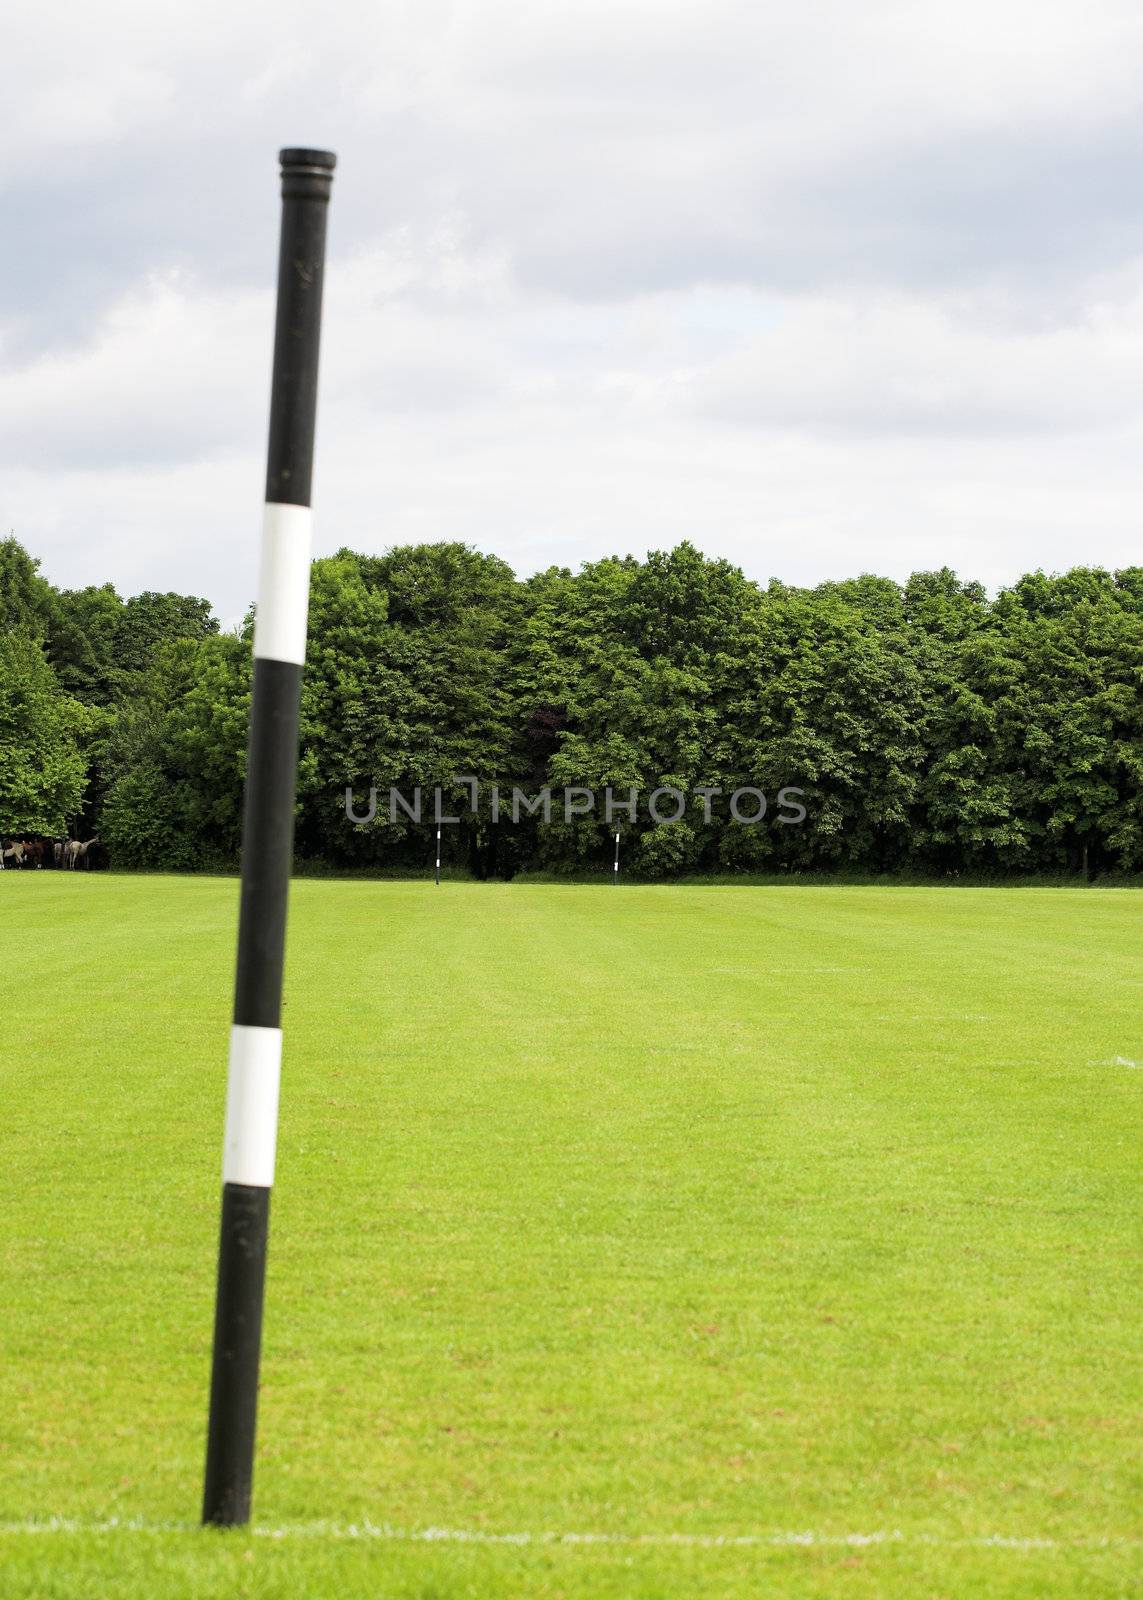 View of a polo field with far goal posts in focus.